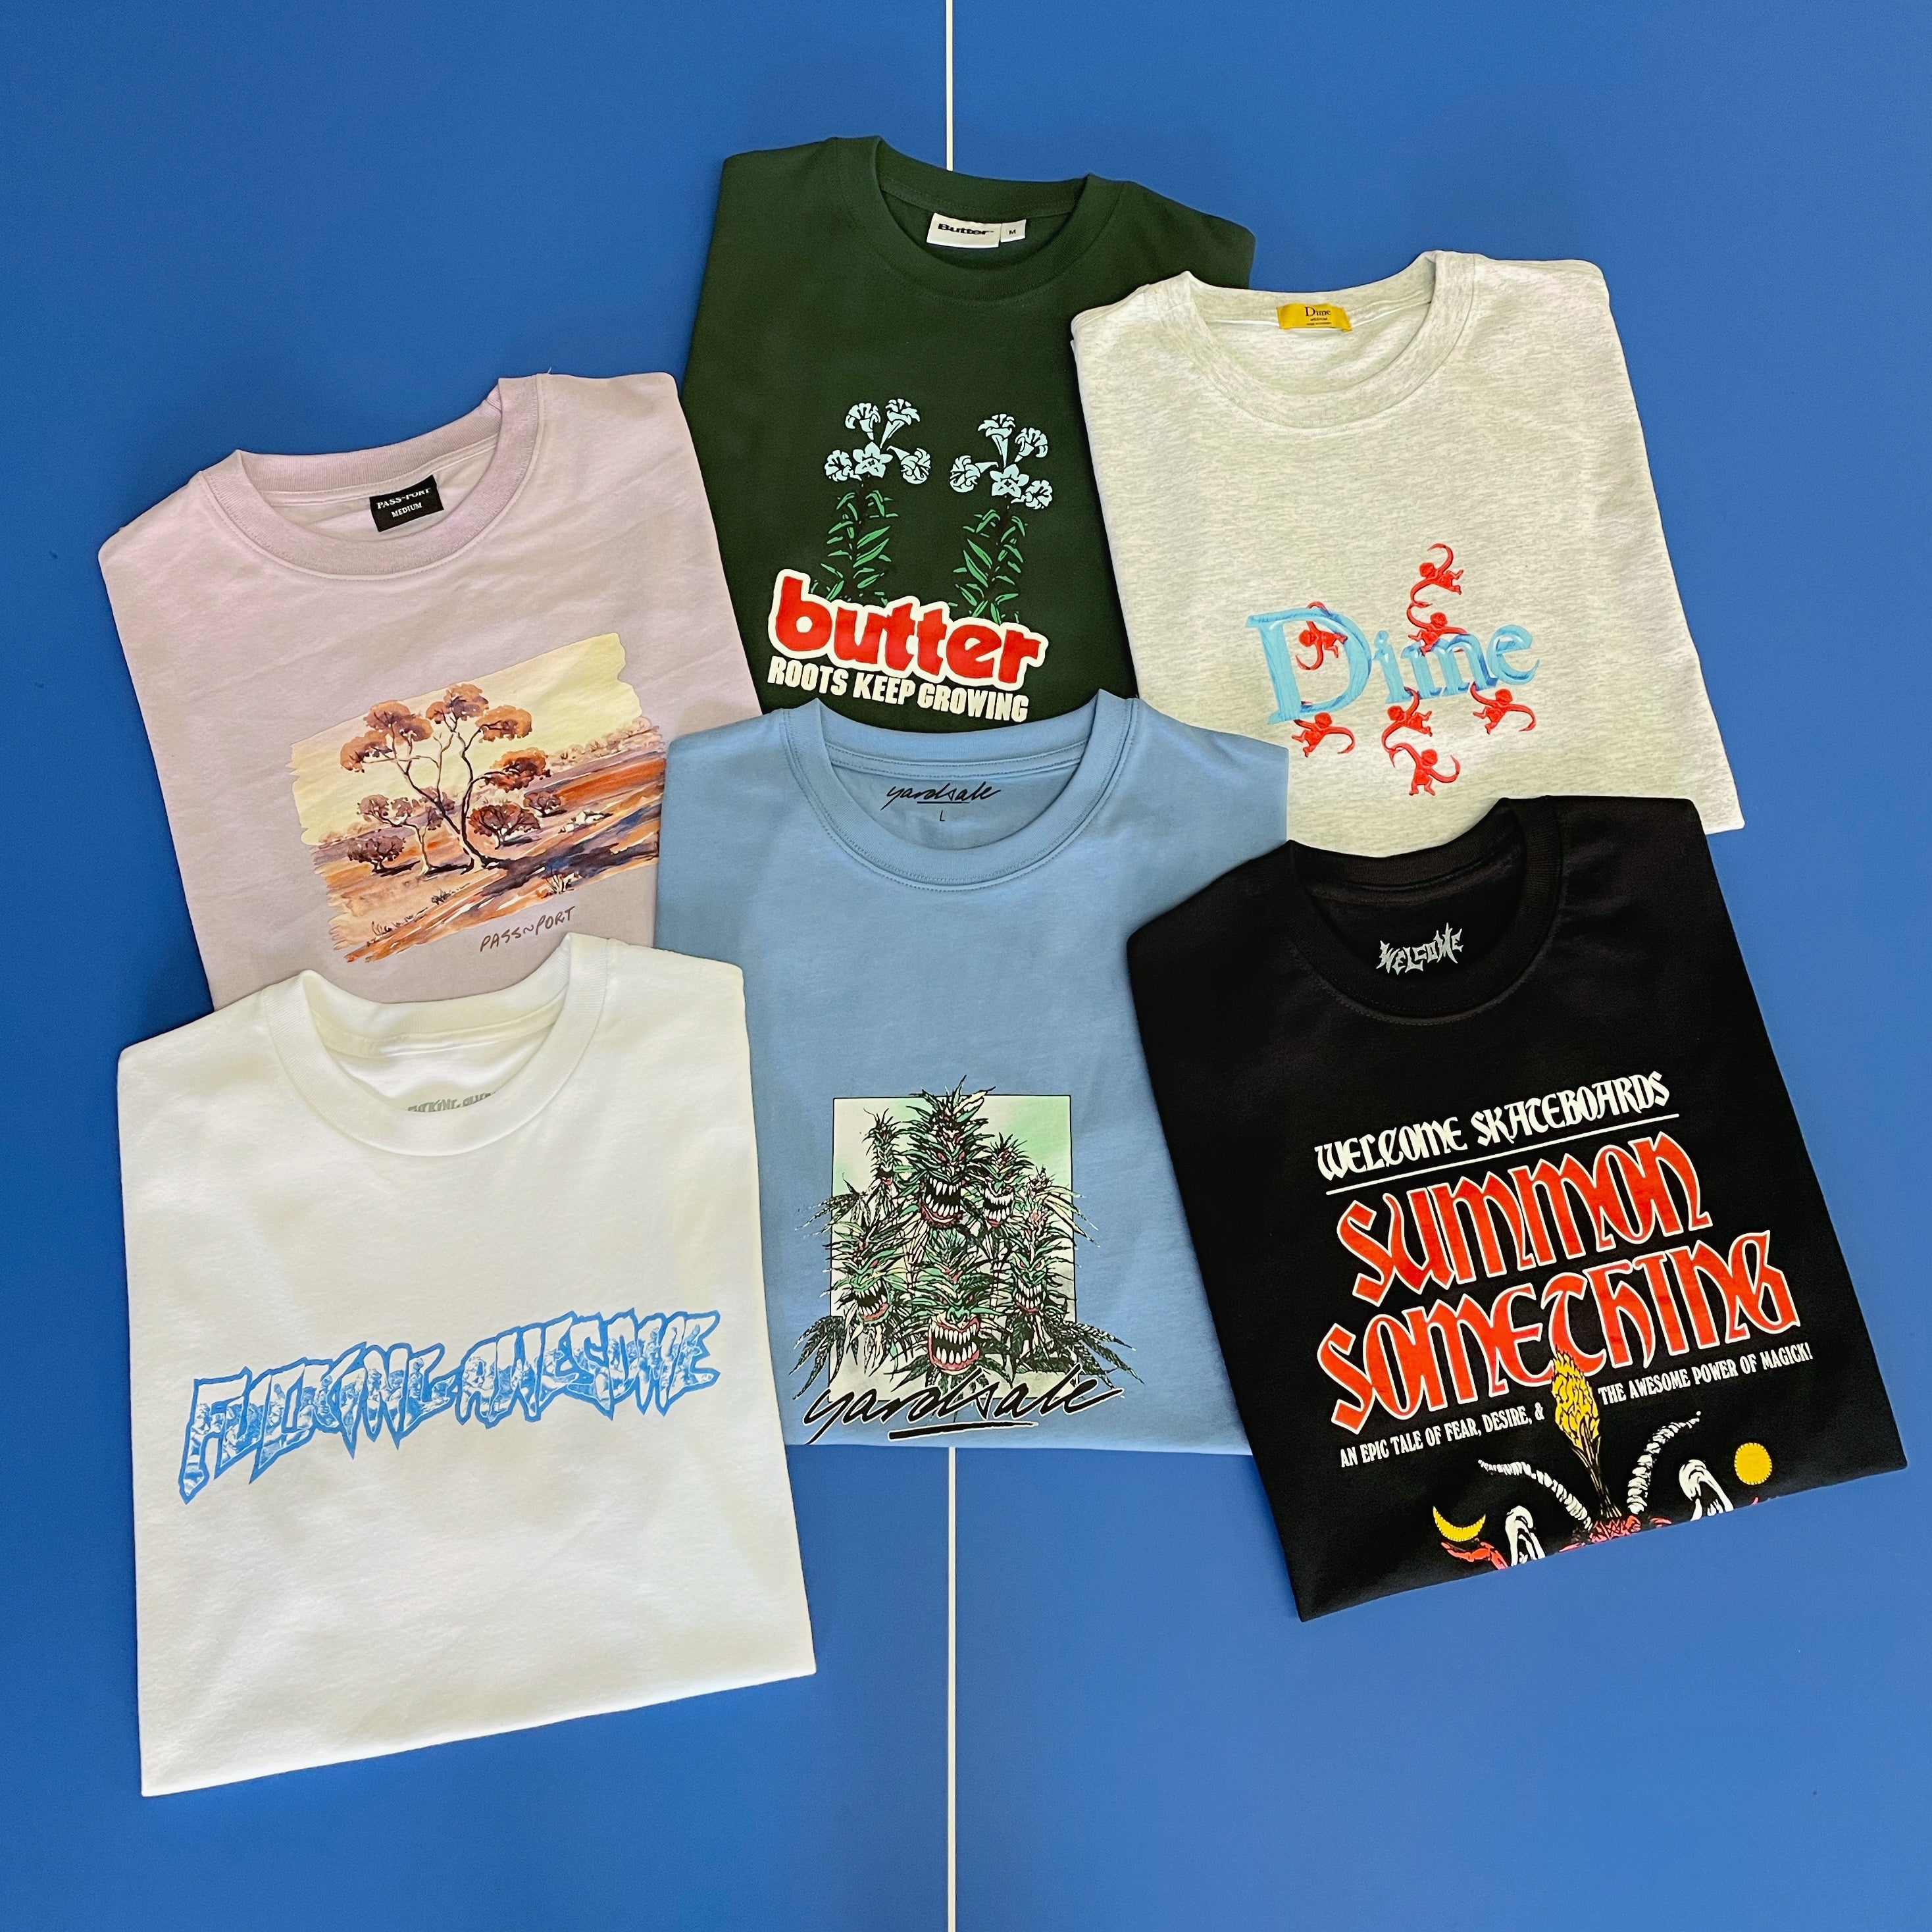 10 of the best T-Shirts This Summer by Carhartt WIP, Blog